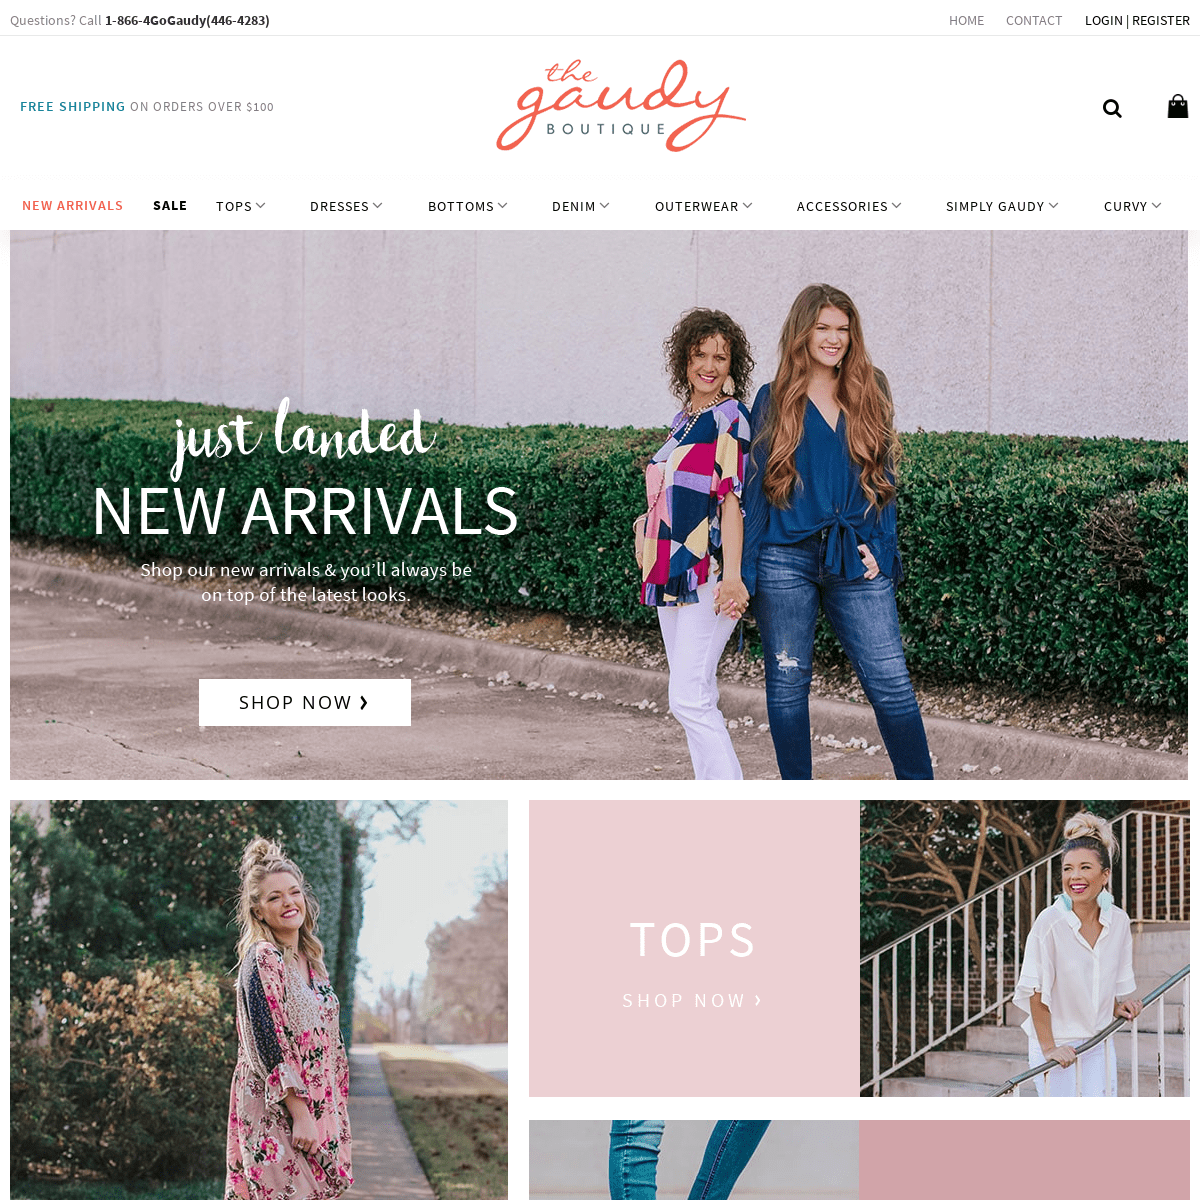 Shop the Gaudy – Affordable, Trendy Women’s Fashions